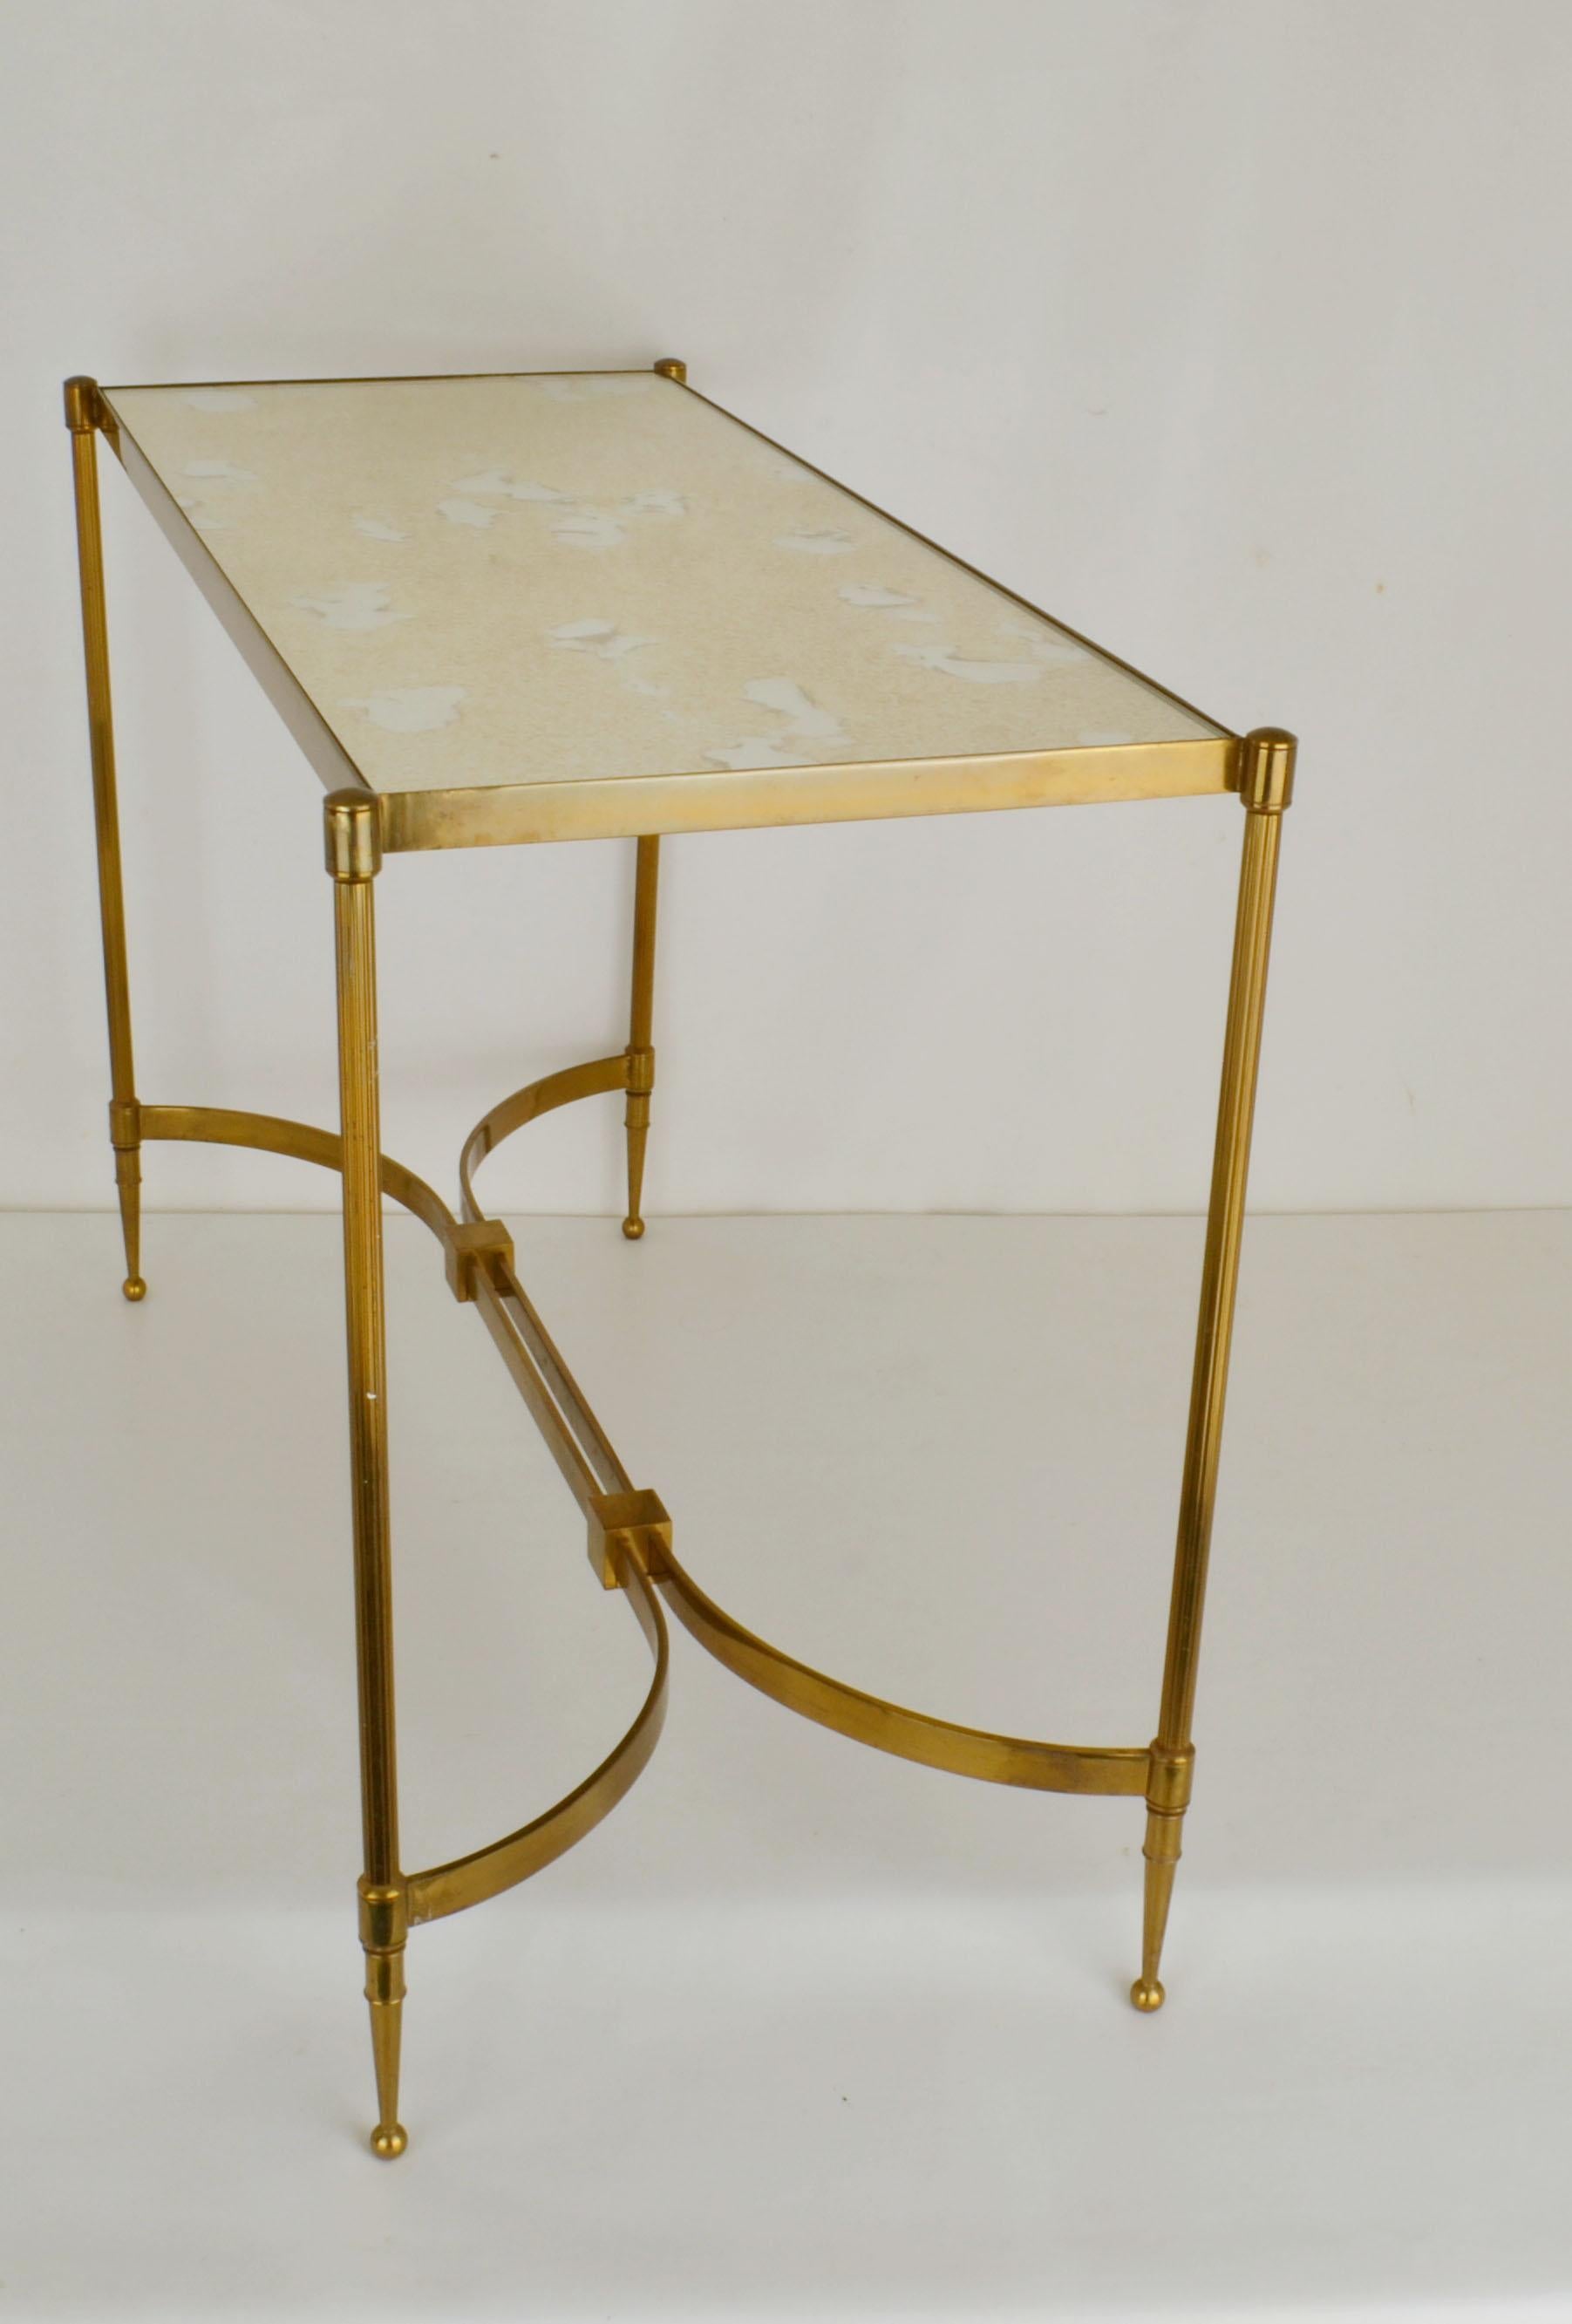 Elegant French rectangular brass coffee table with oxidized mirrored glass that sits on top. The four reeded legs are joined together by two bowed rectangular stretchers joined by two square central finials. The straight shaped table leg as a series